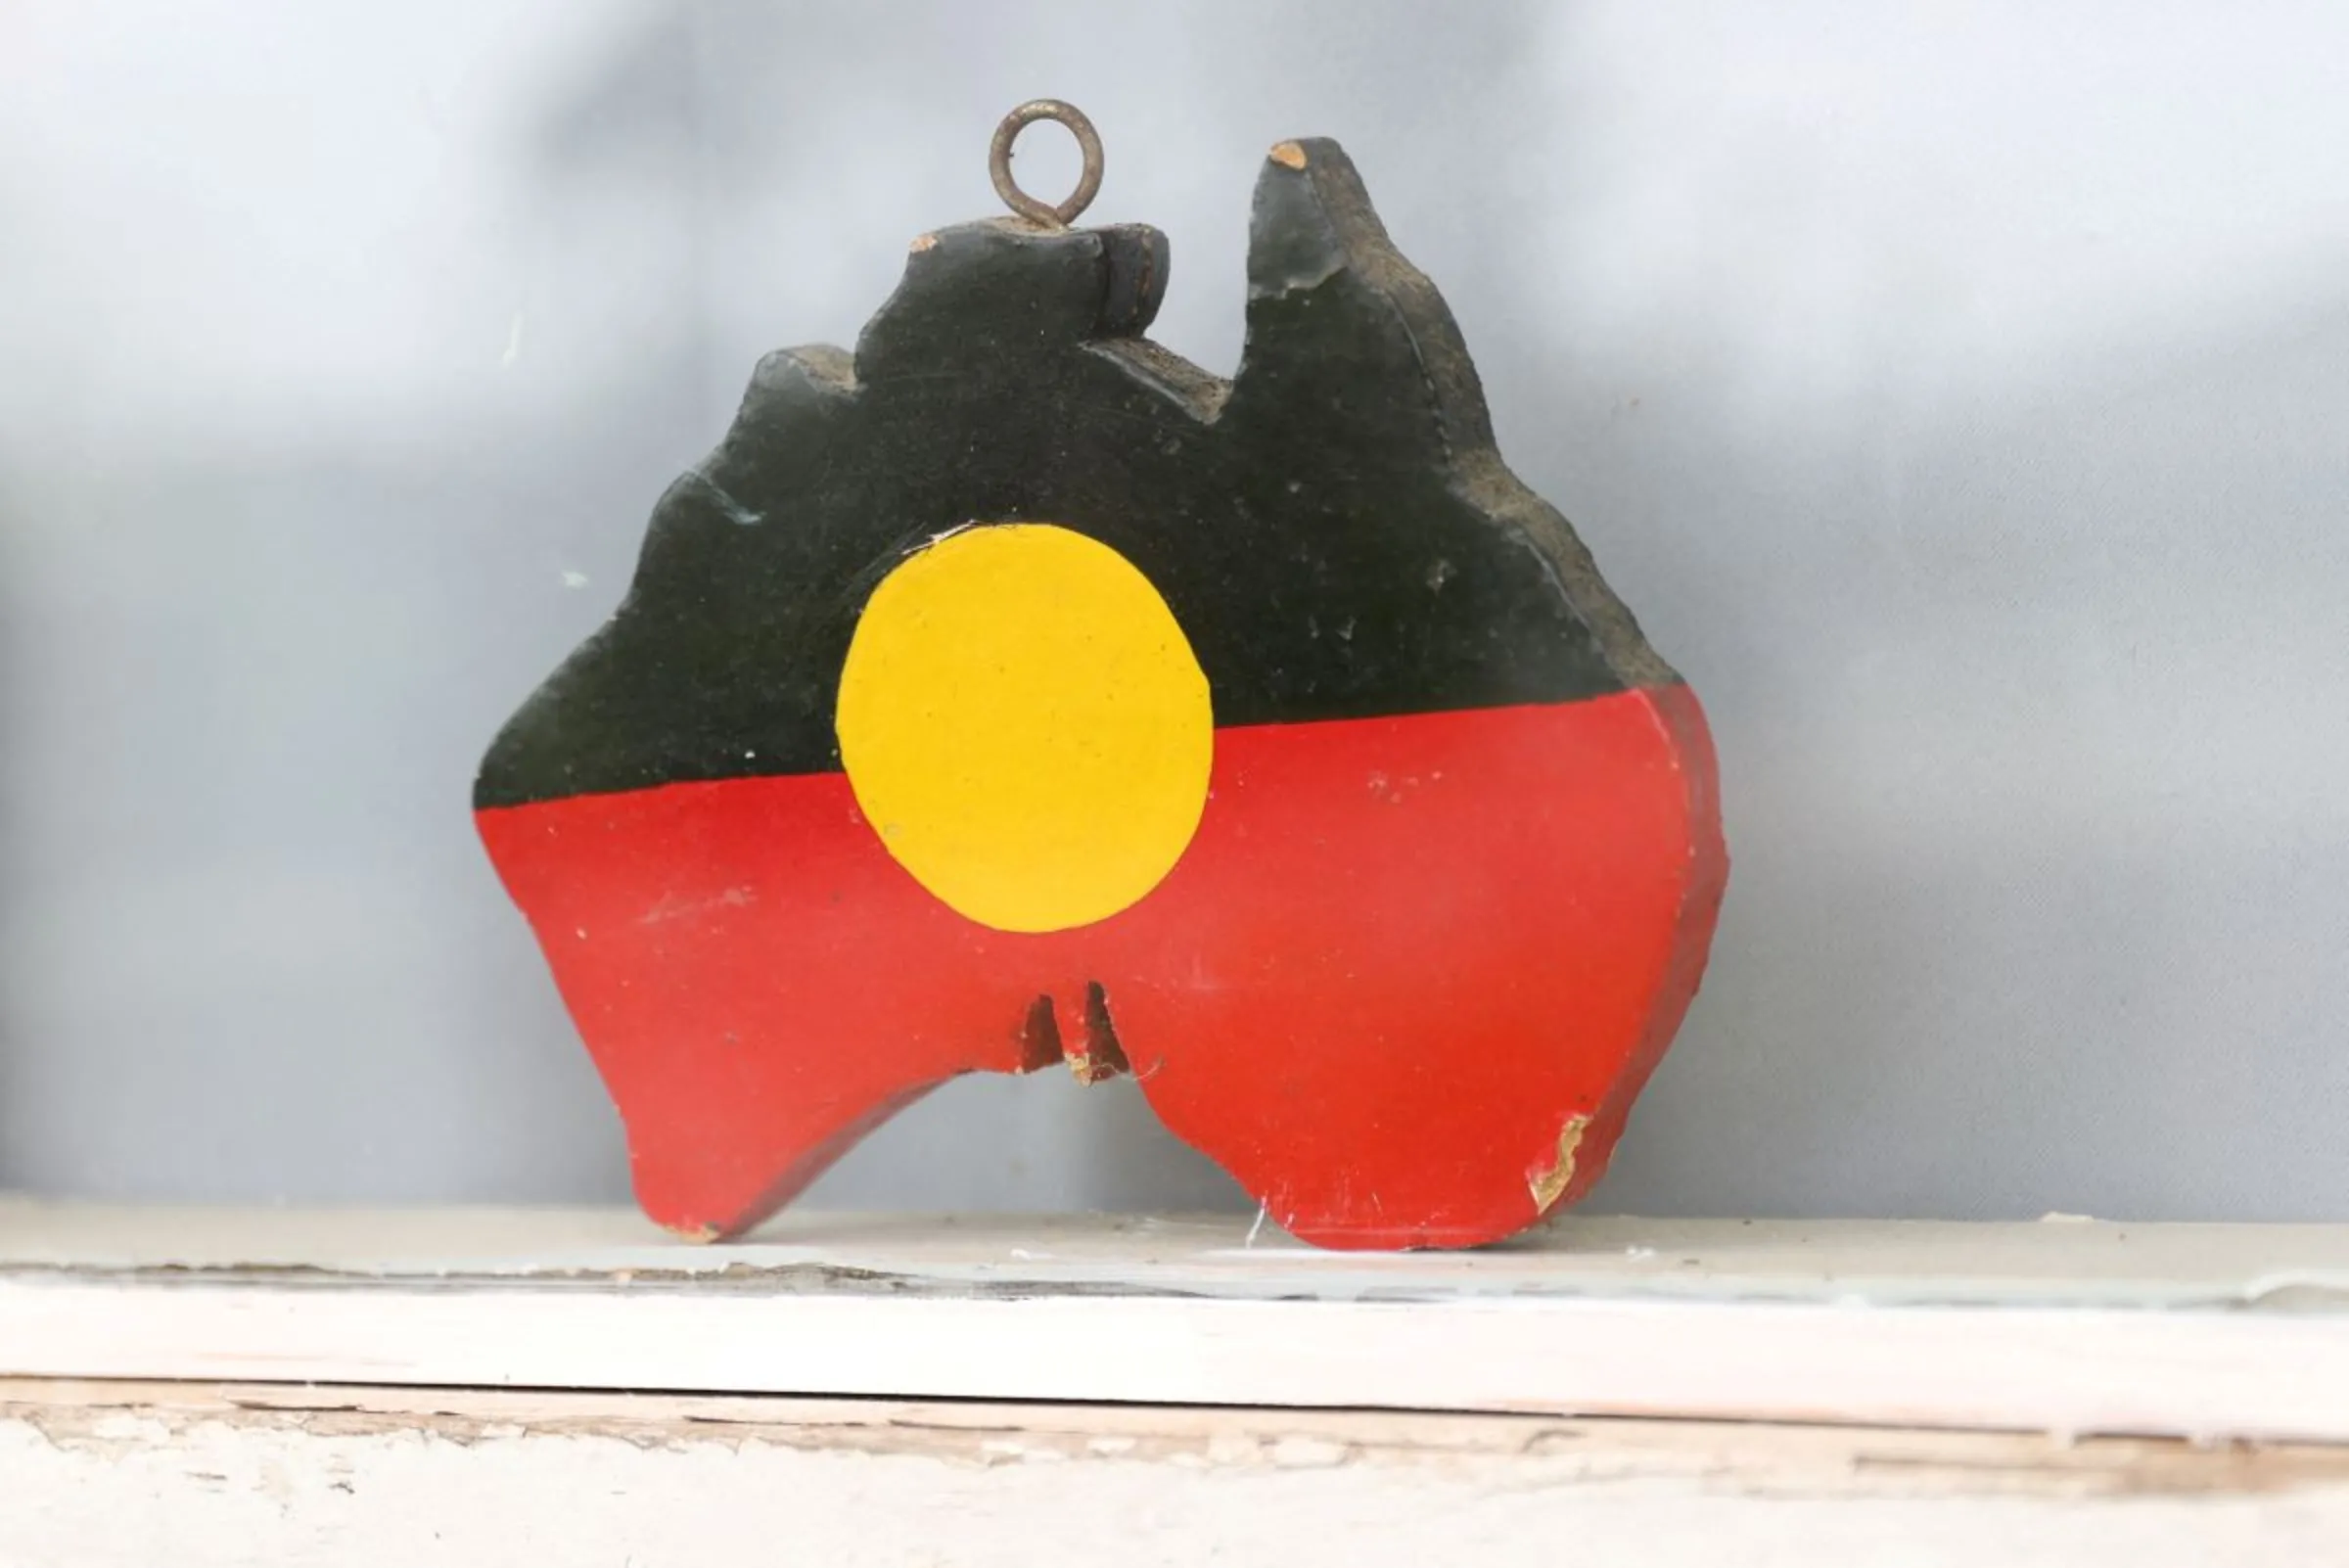 A depiction of the Australian Aboriginal Flag is seen on a window sill at the home of indigenous Muruwari elder Rita Wright, a member of the 'Stolen Generations', in Sydney, Australia, January 19, 2021